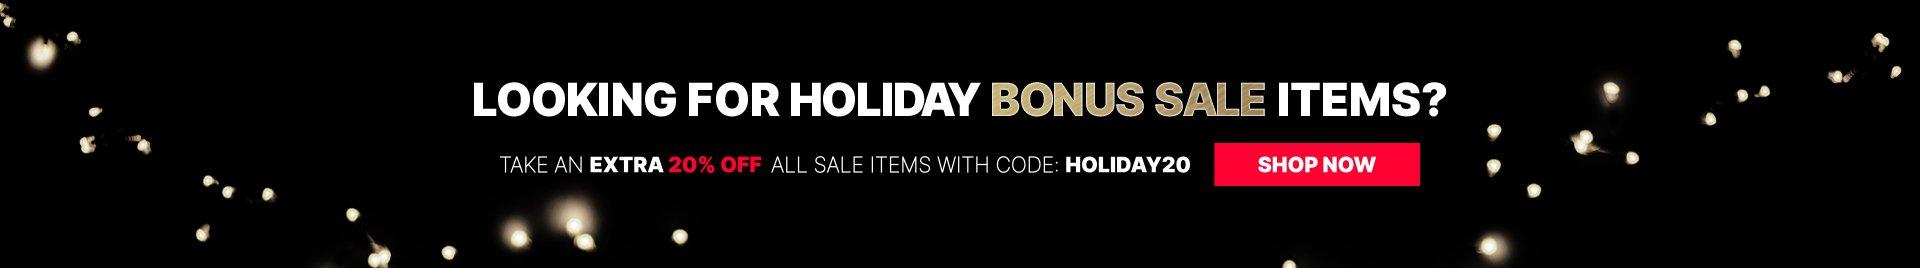 Pure Fishing 2022 Holiday Bonus Sale: TAKE AN EXTRA 20% OFF ALL SALE ITEMS WITH CODE: HOLIDAY20